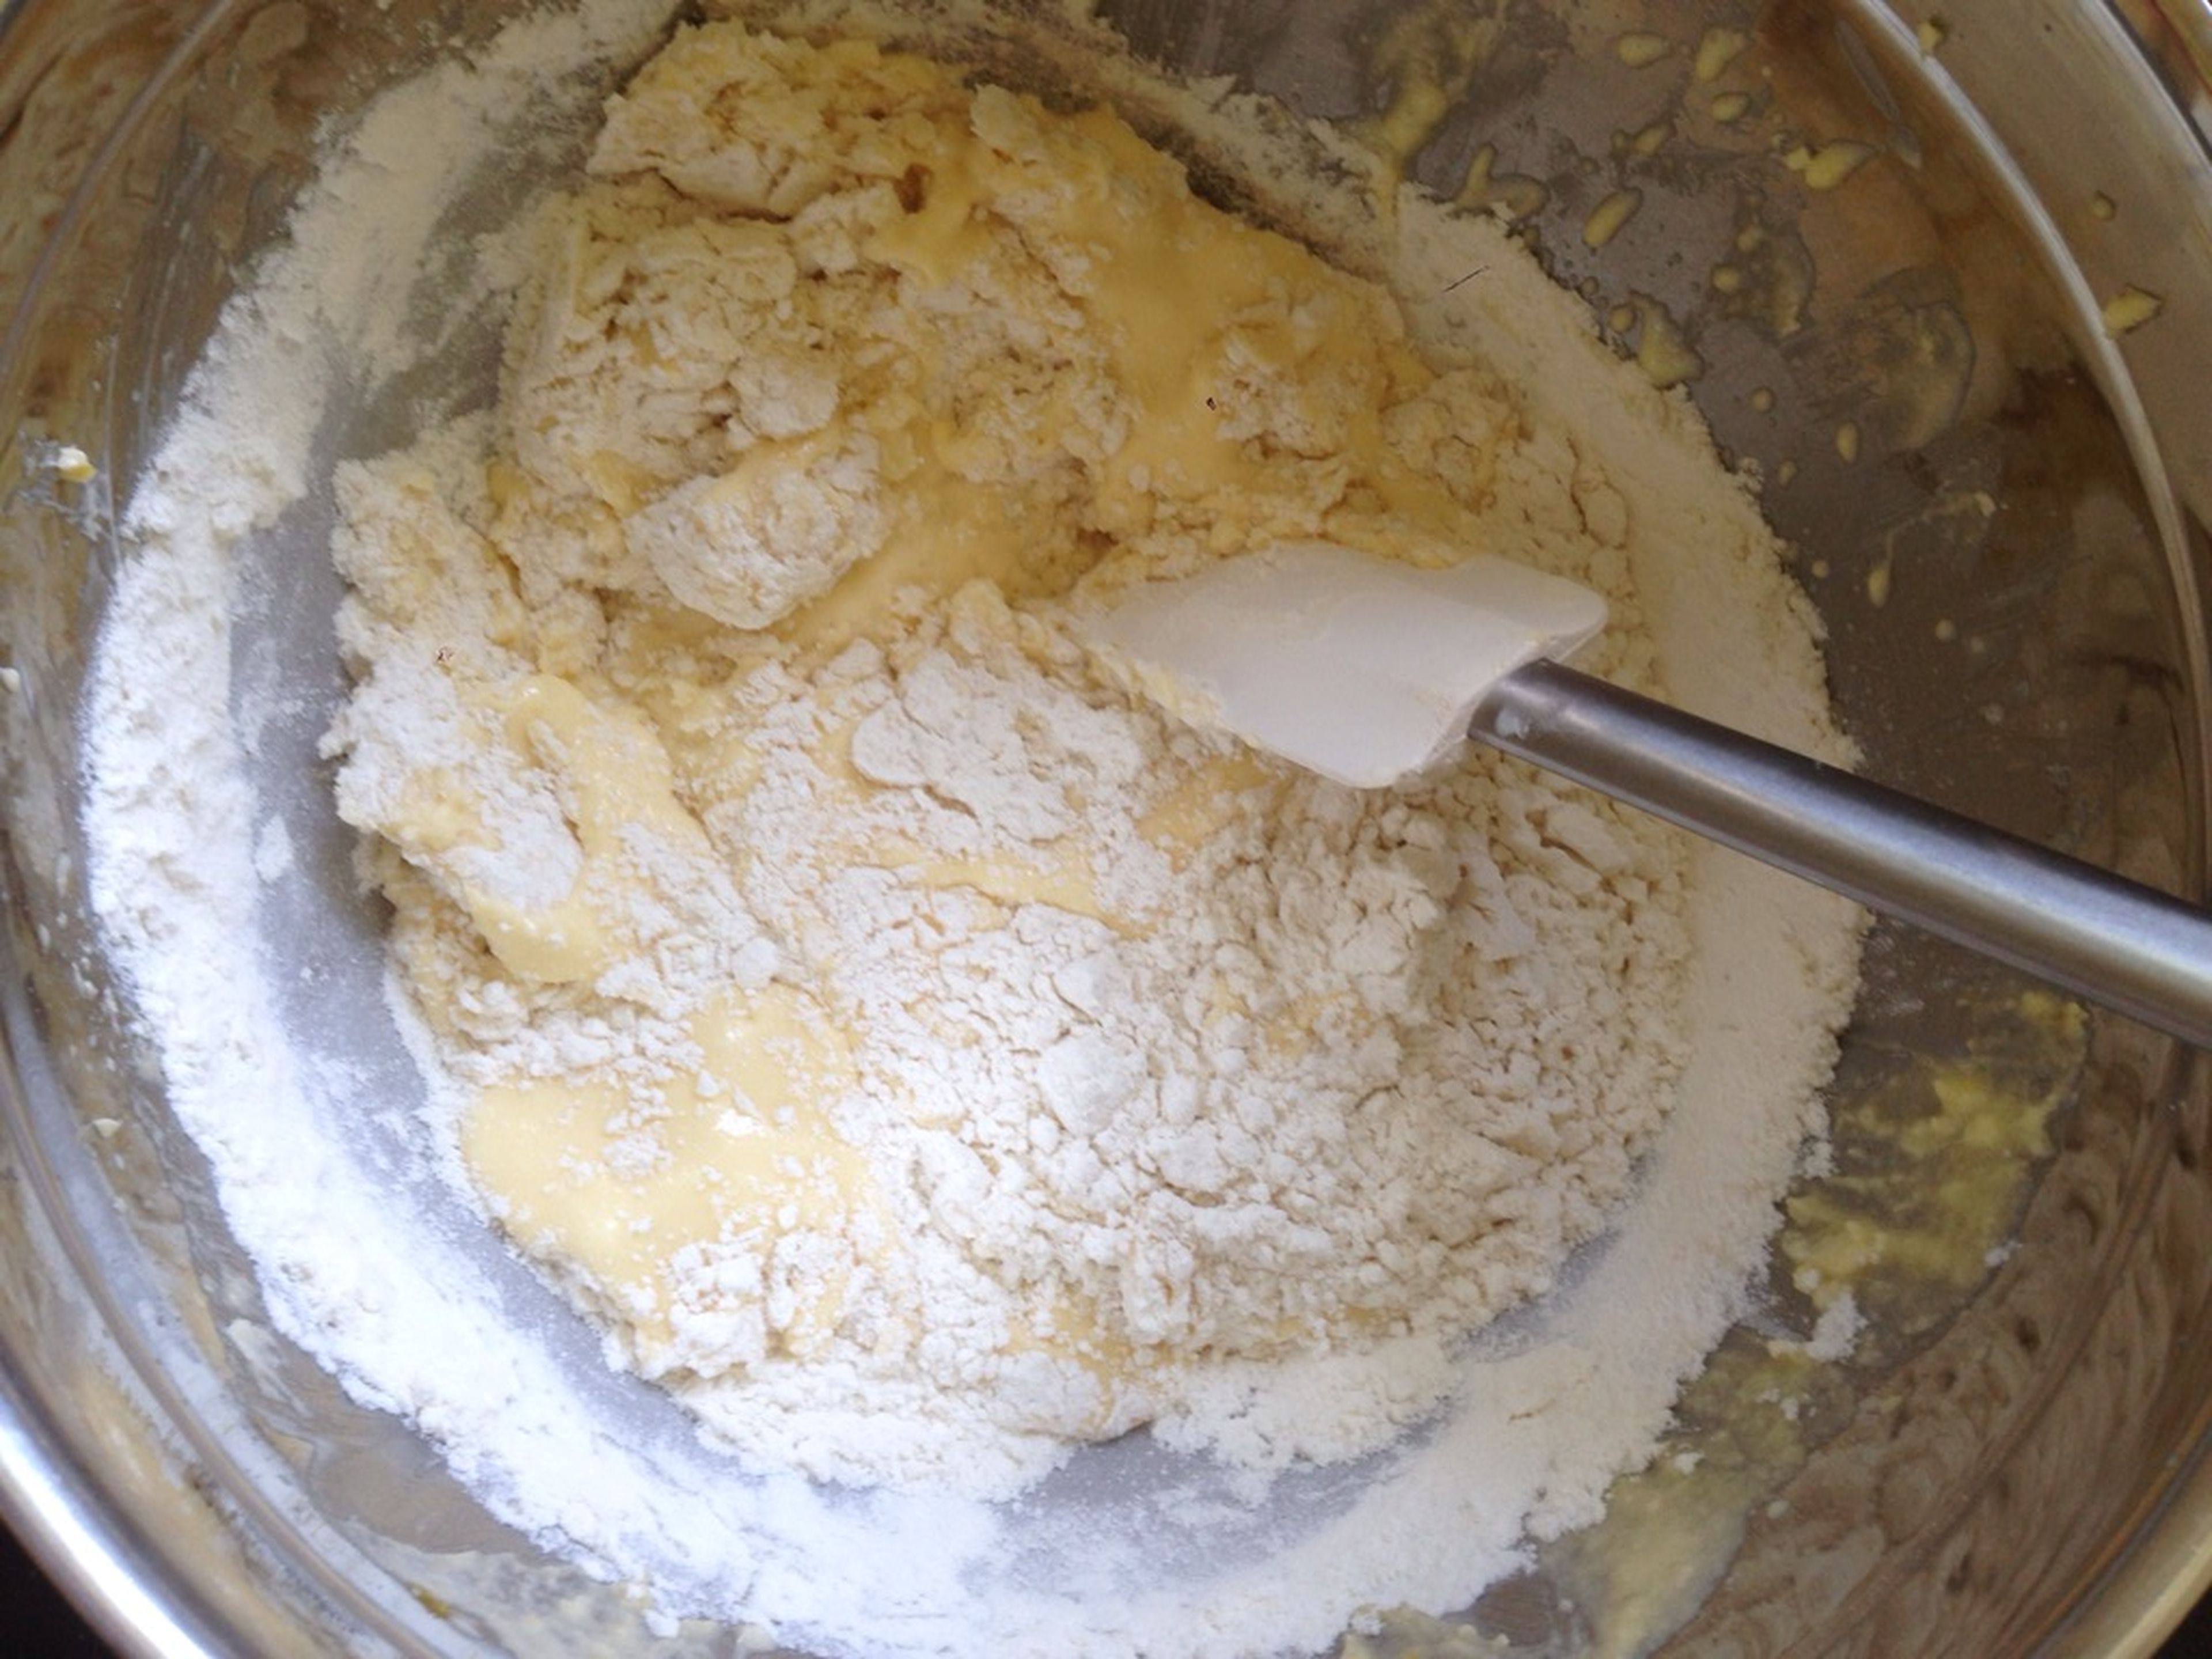 Fold into the butter-egg mixture.